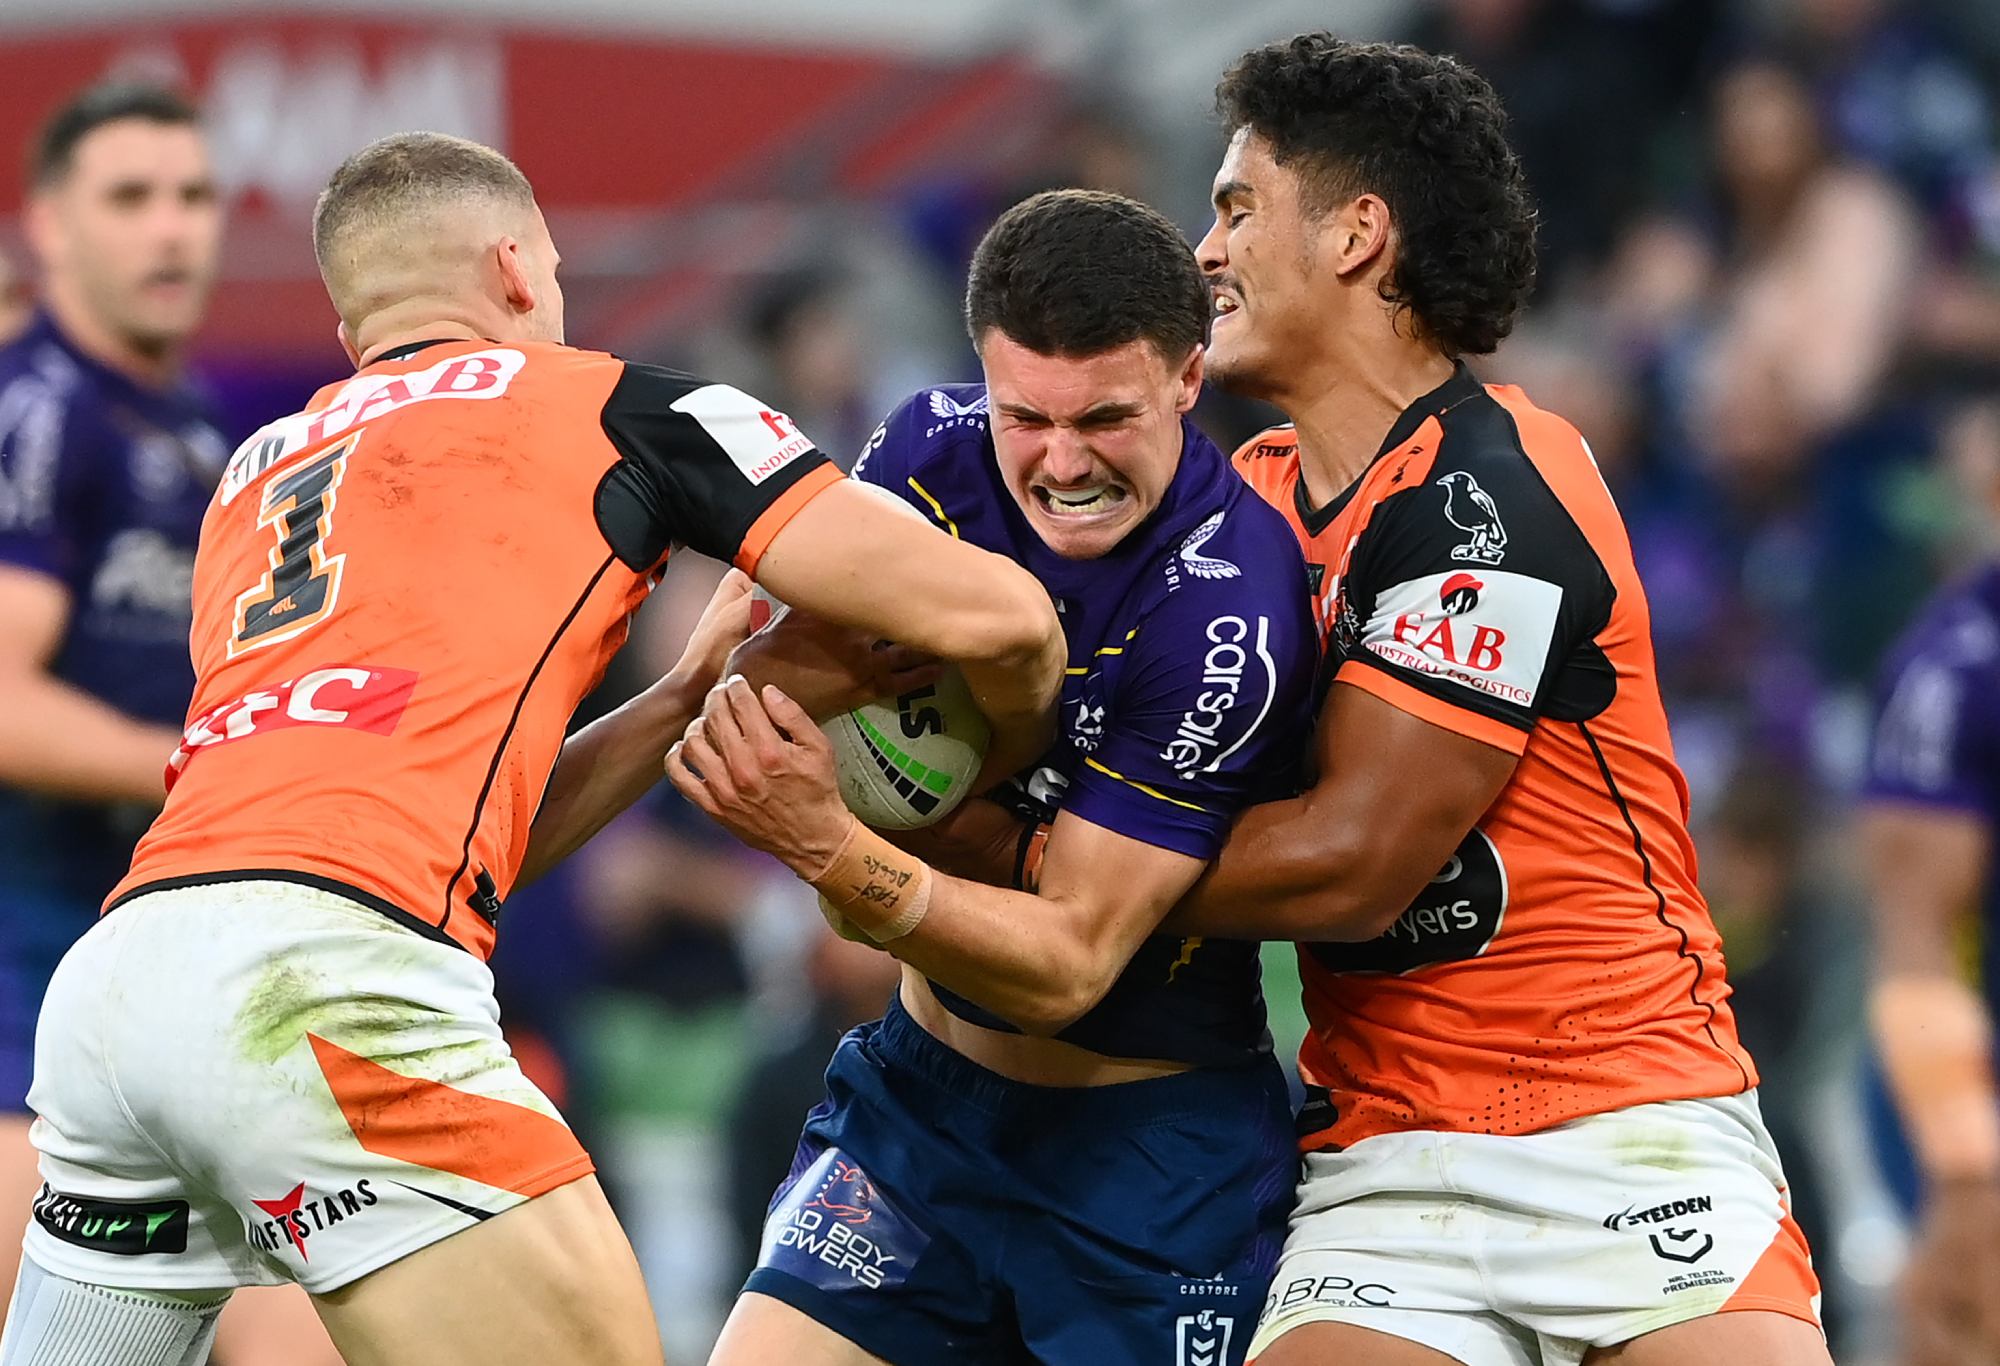 MELBOURNE, AUSTRALIA - MARCH 24: Jonah Pezet of the Storm is tackled during the round four NRL match between the Melbourne Storm and Wests Tigers at AAMI Park on March 24, 2023 in Melbourne, Australia. (Photo by Quinn Rooney/Getty Images)